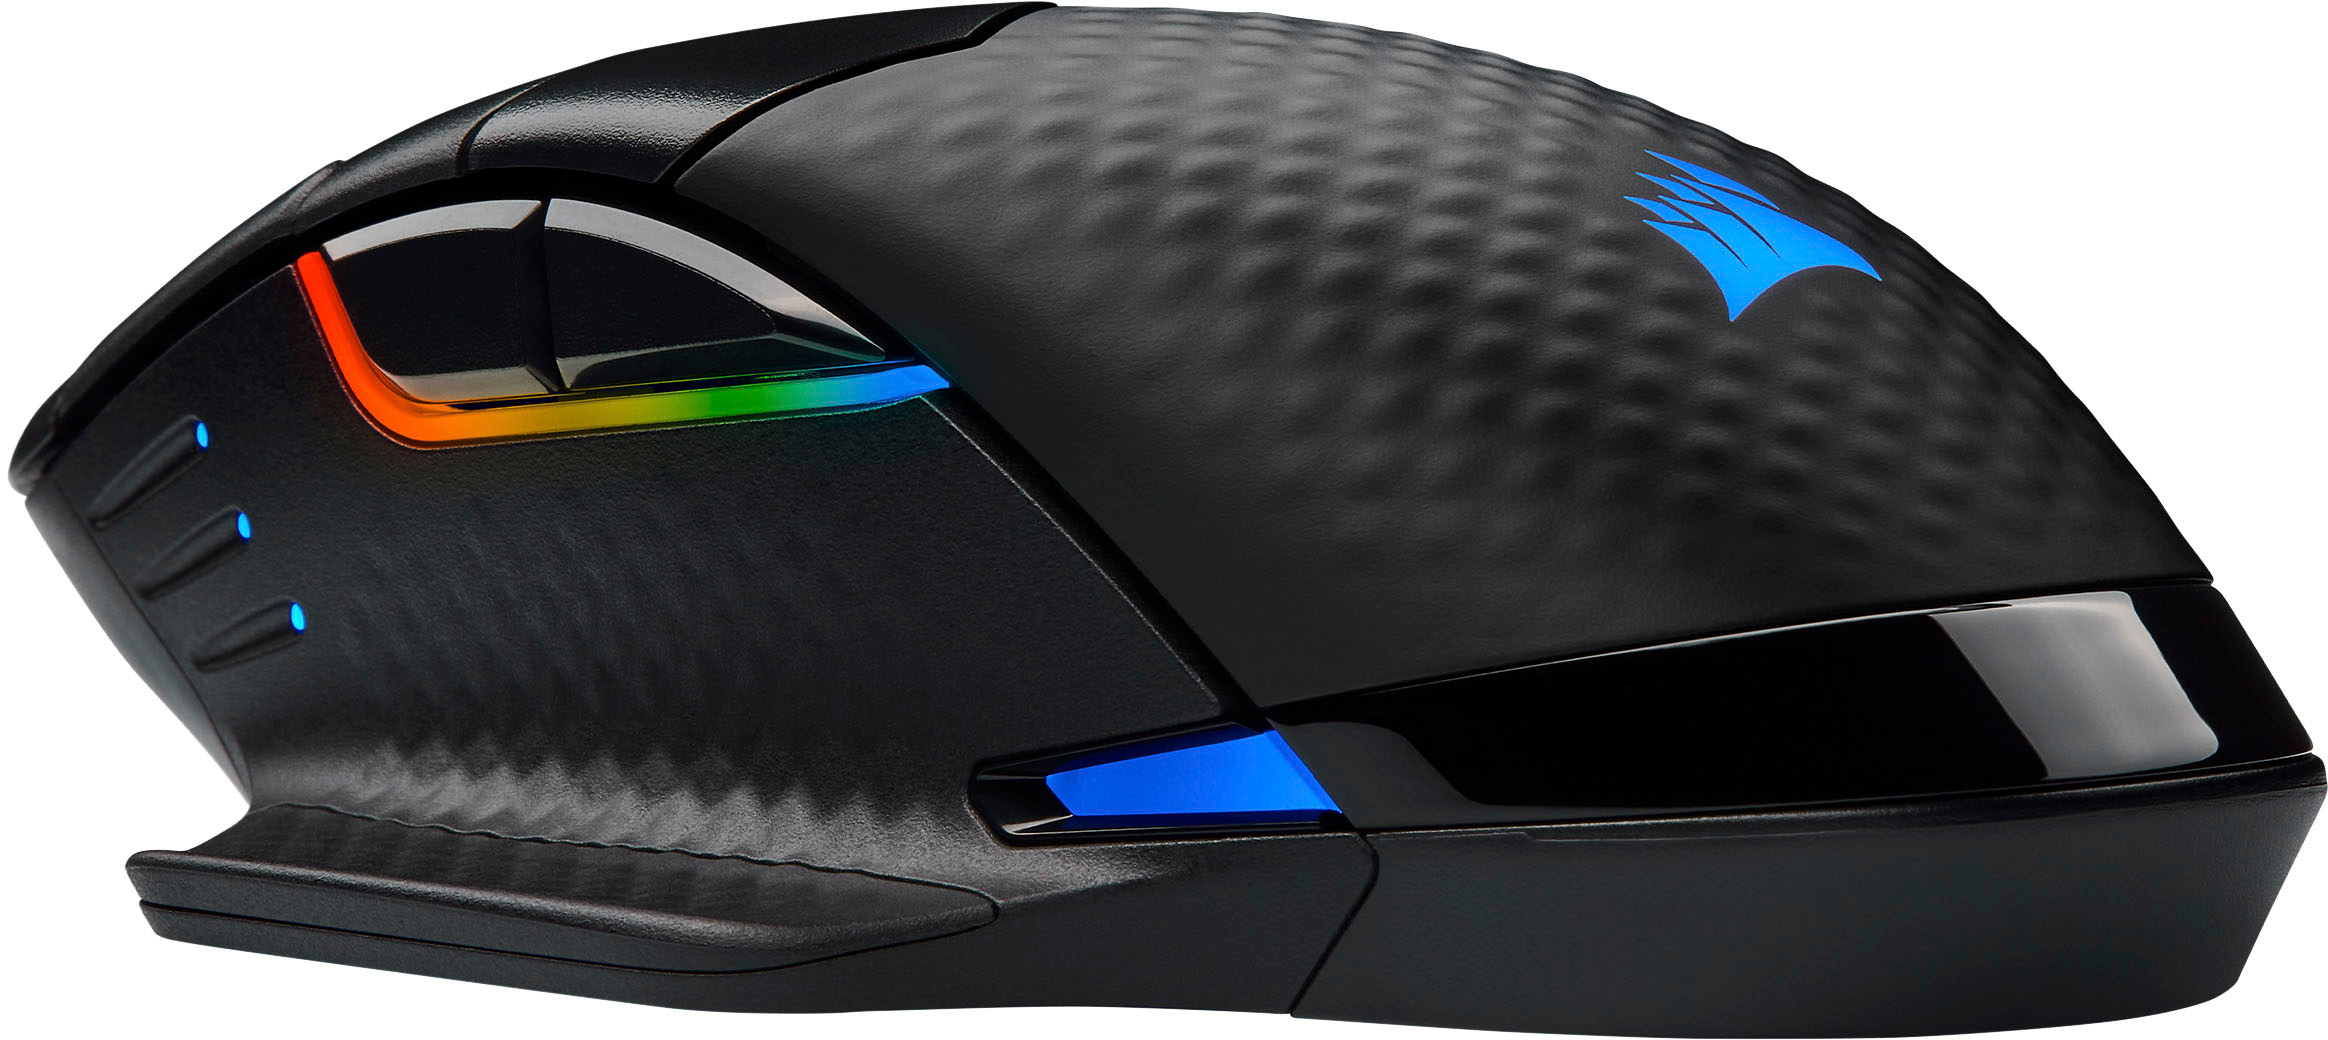 CORSAIR DARK CORE RGB SE Wireless Optical Gaming Mouse with Qi Wireless Charging Black CH-9315511-NA - Best Buy